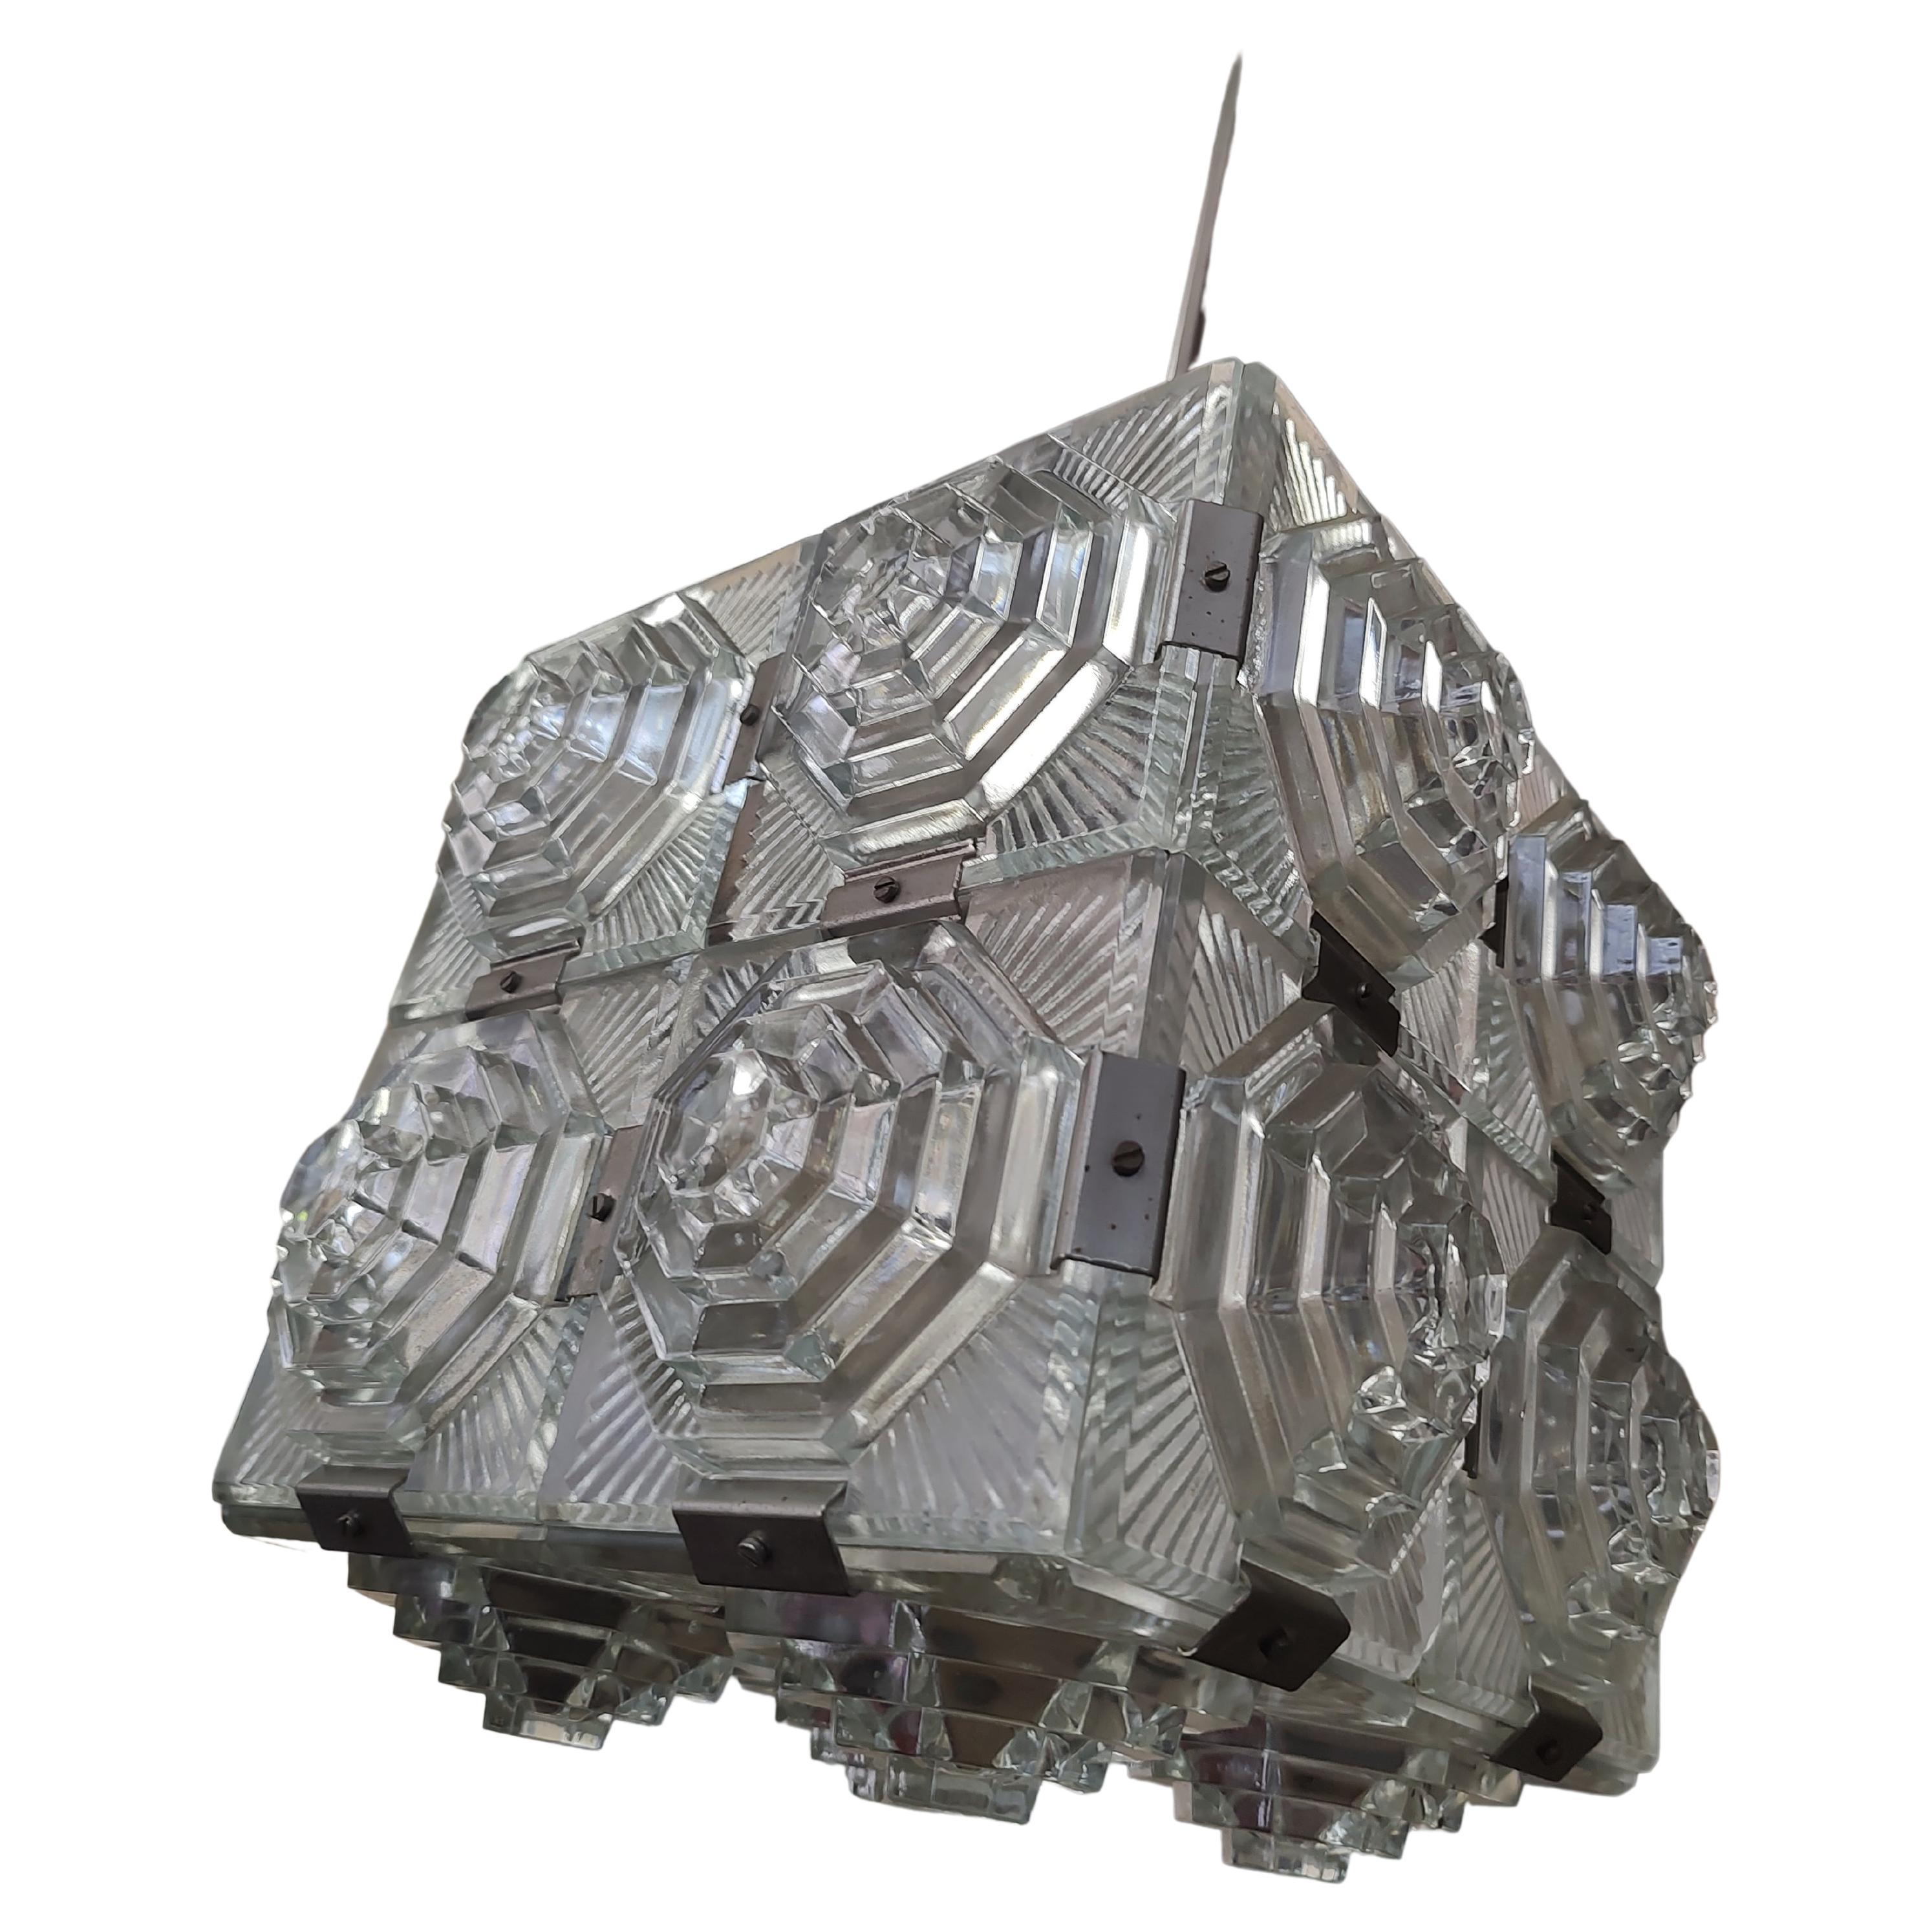 Mid-20th Century Midcentury French Art Deco Faceted Cubist Stylized Pendant Chandelier  For Sale